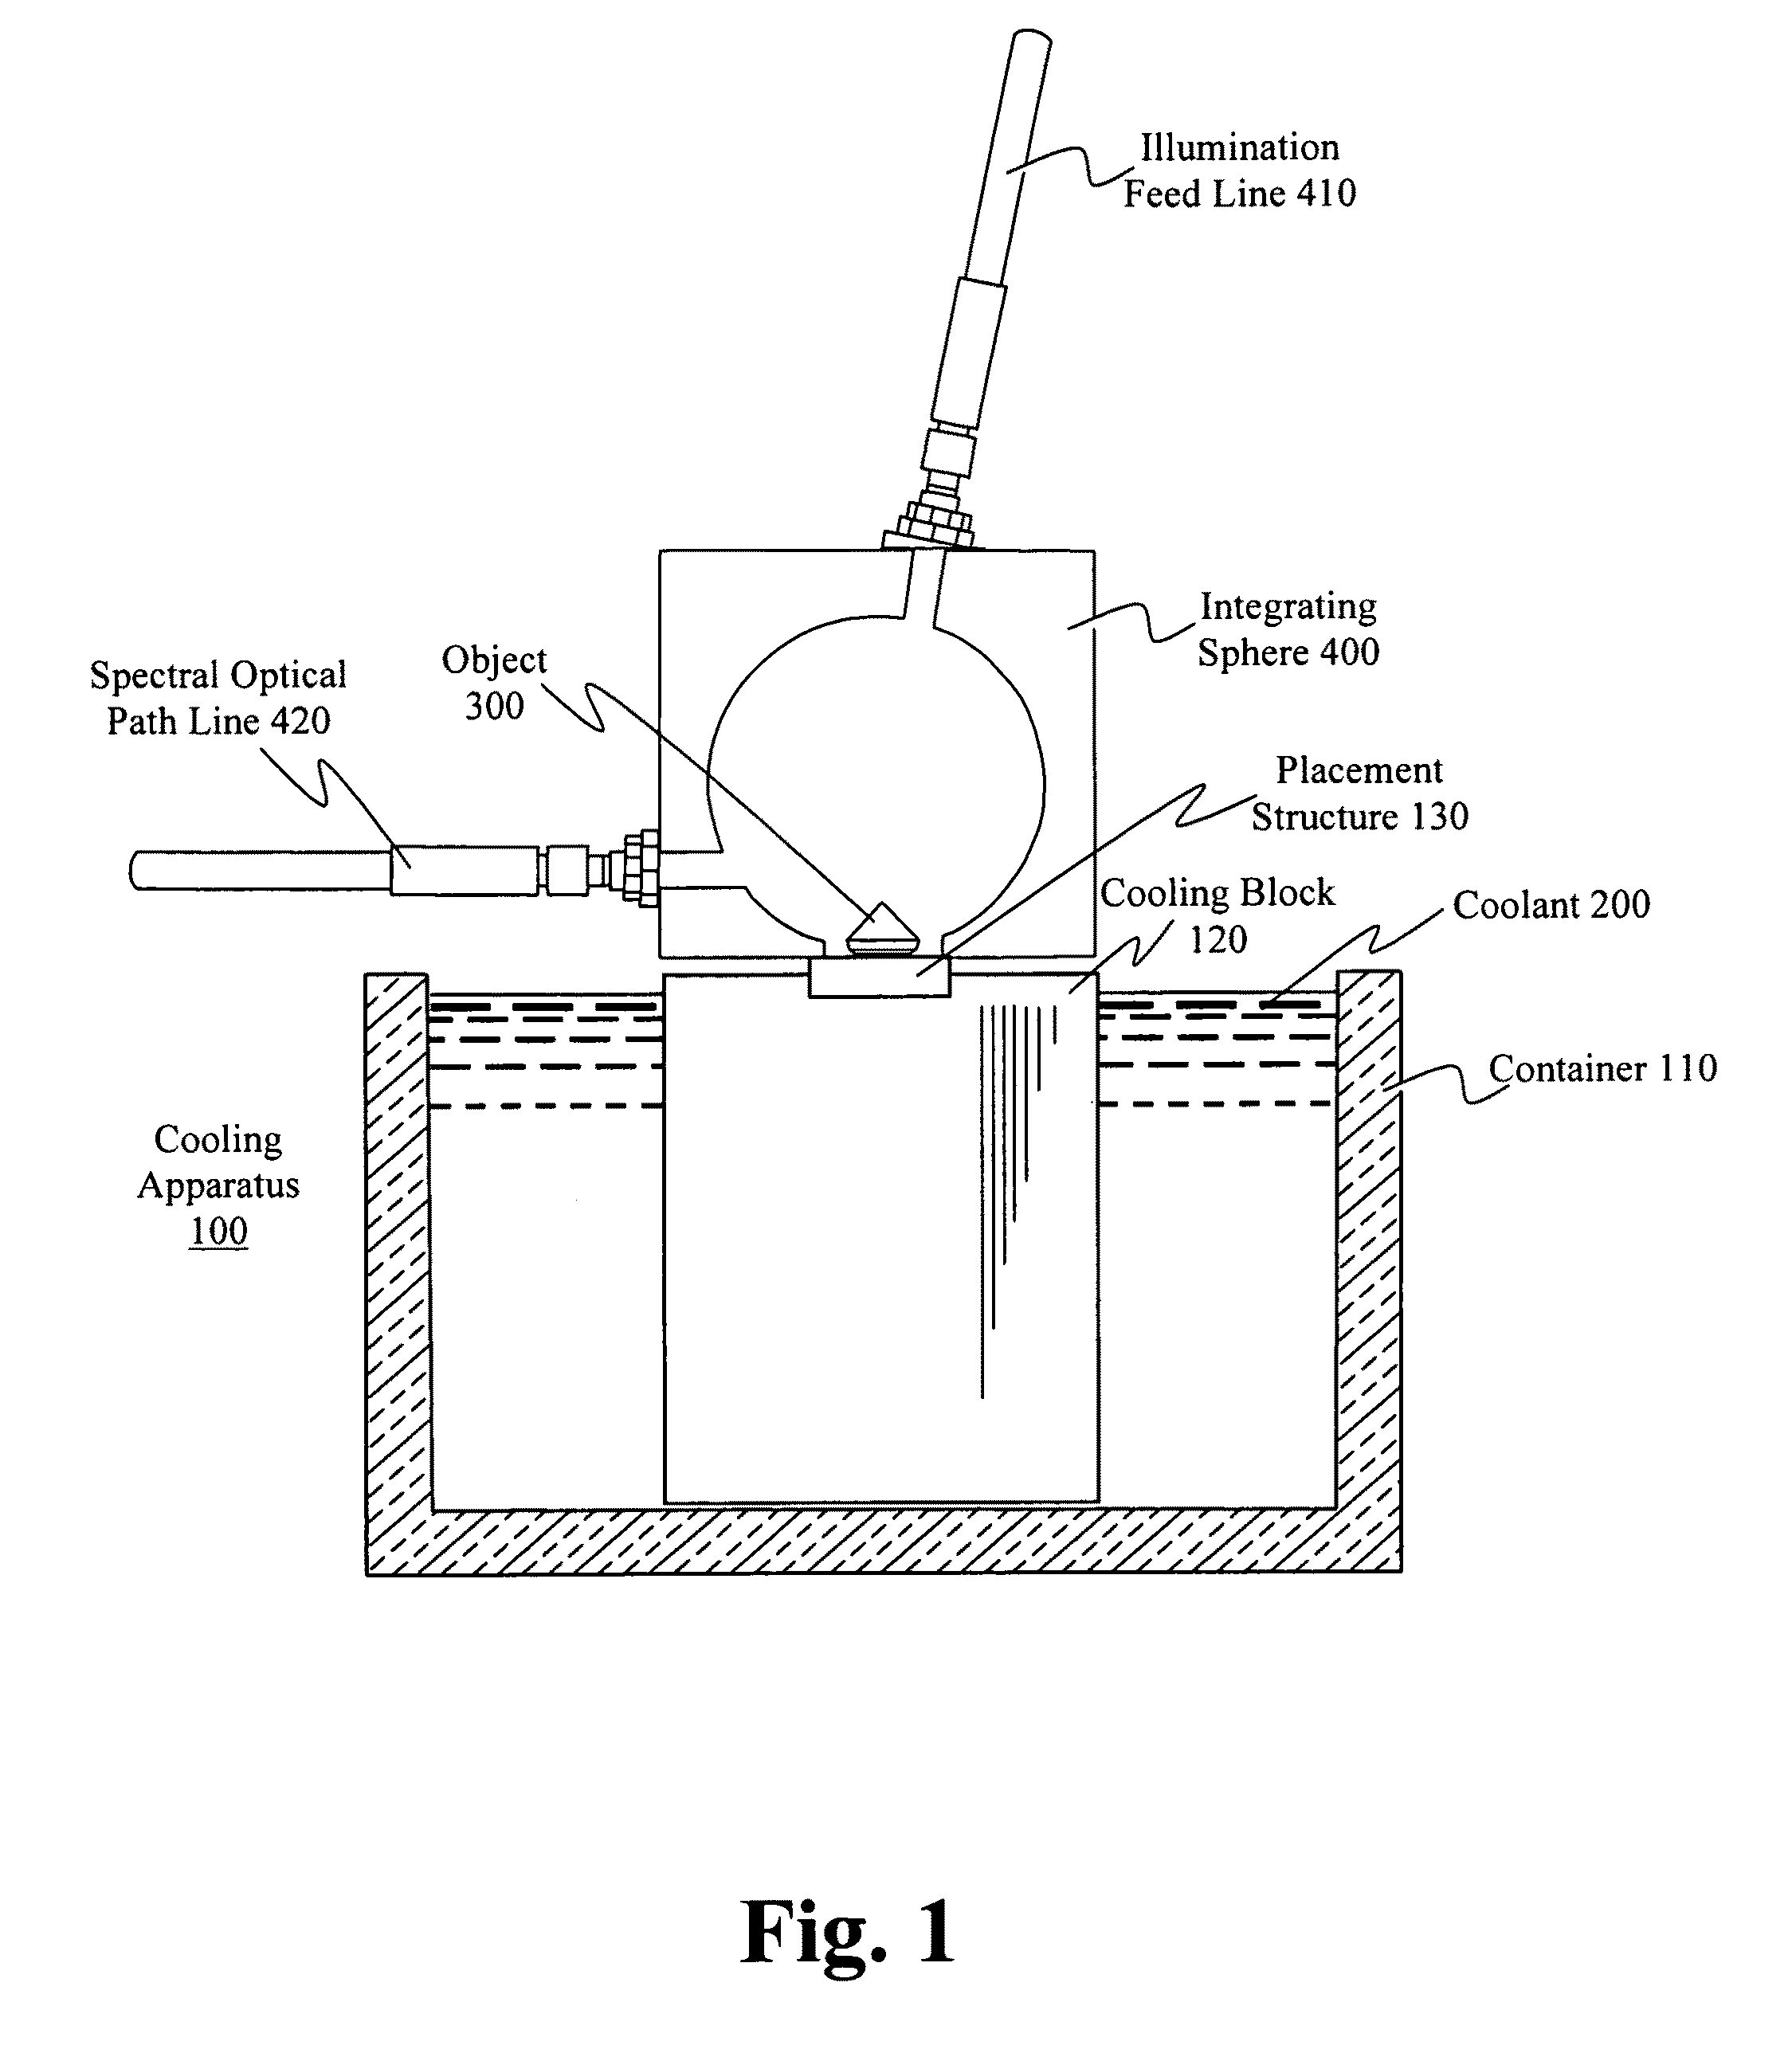 Method and apparatus for rapidly cooling a gem, including two stage cooling